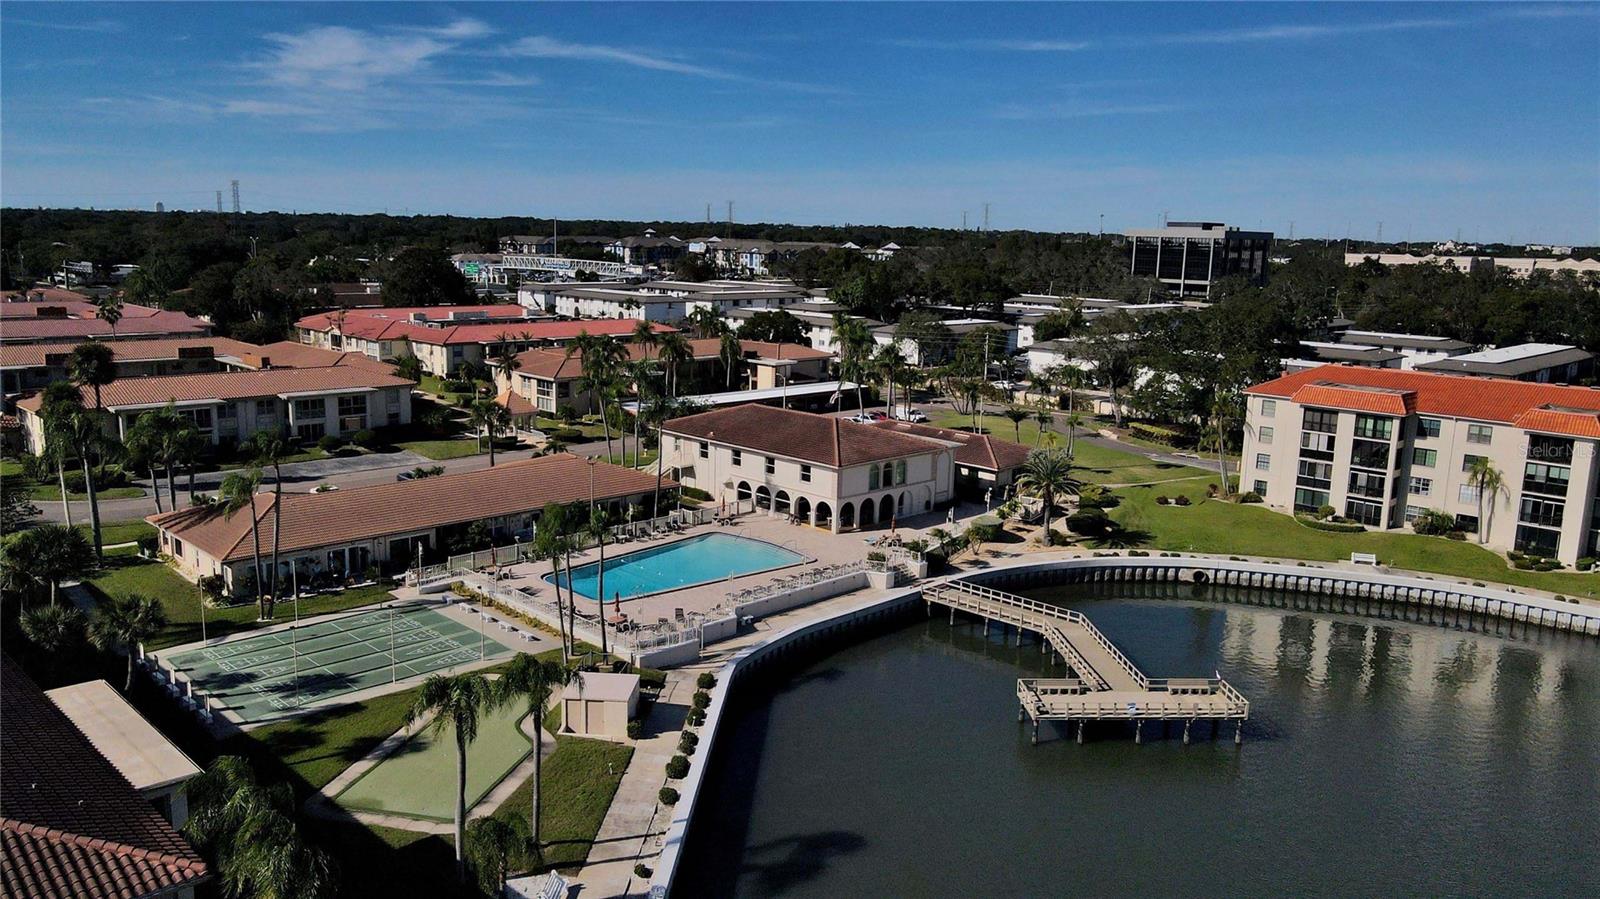 Pool and clubhouse view and view of Fishing pier in lagoon